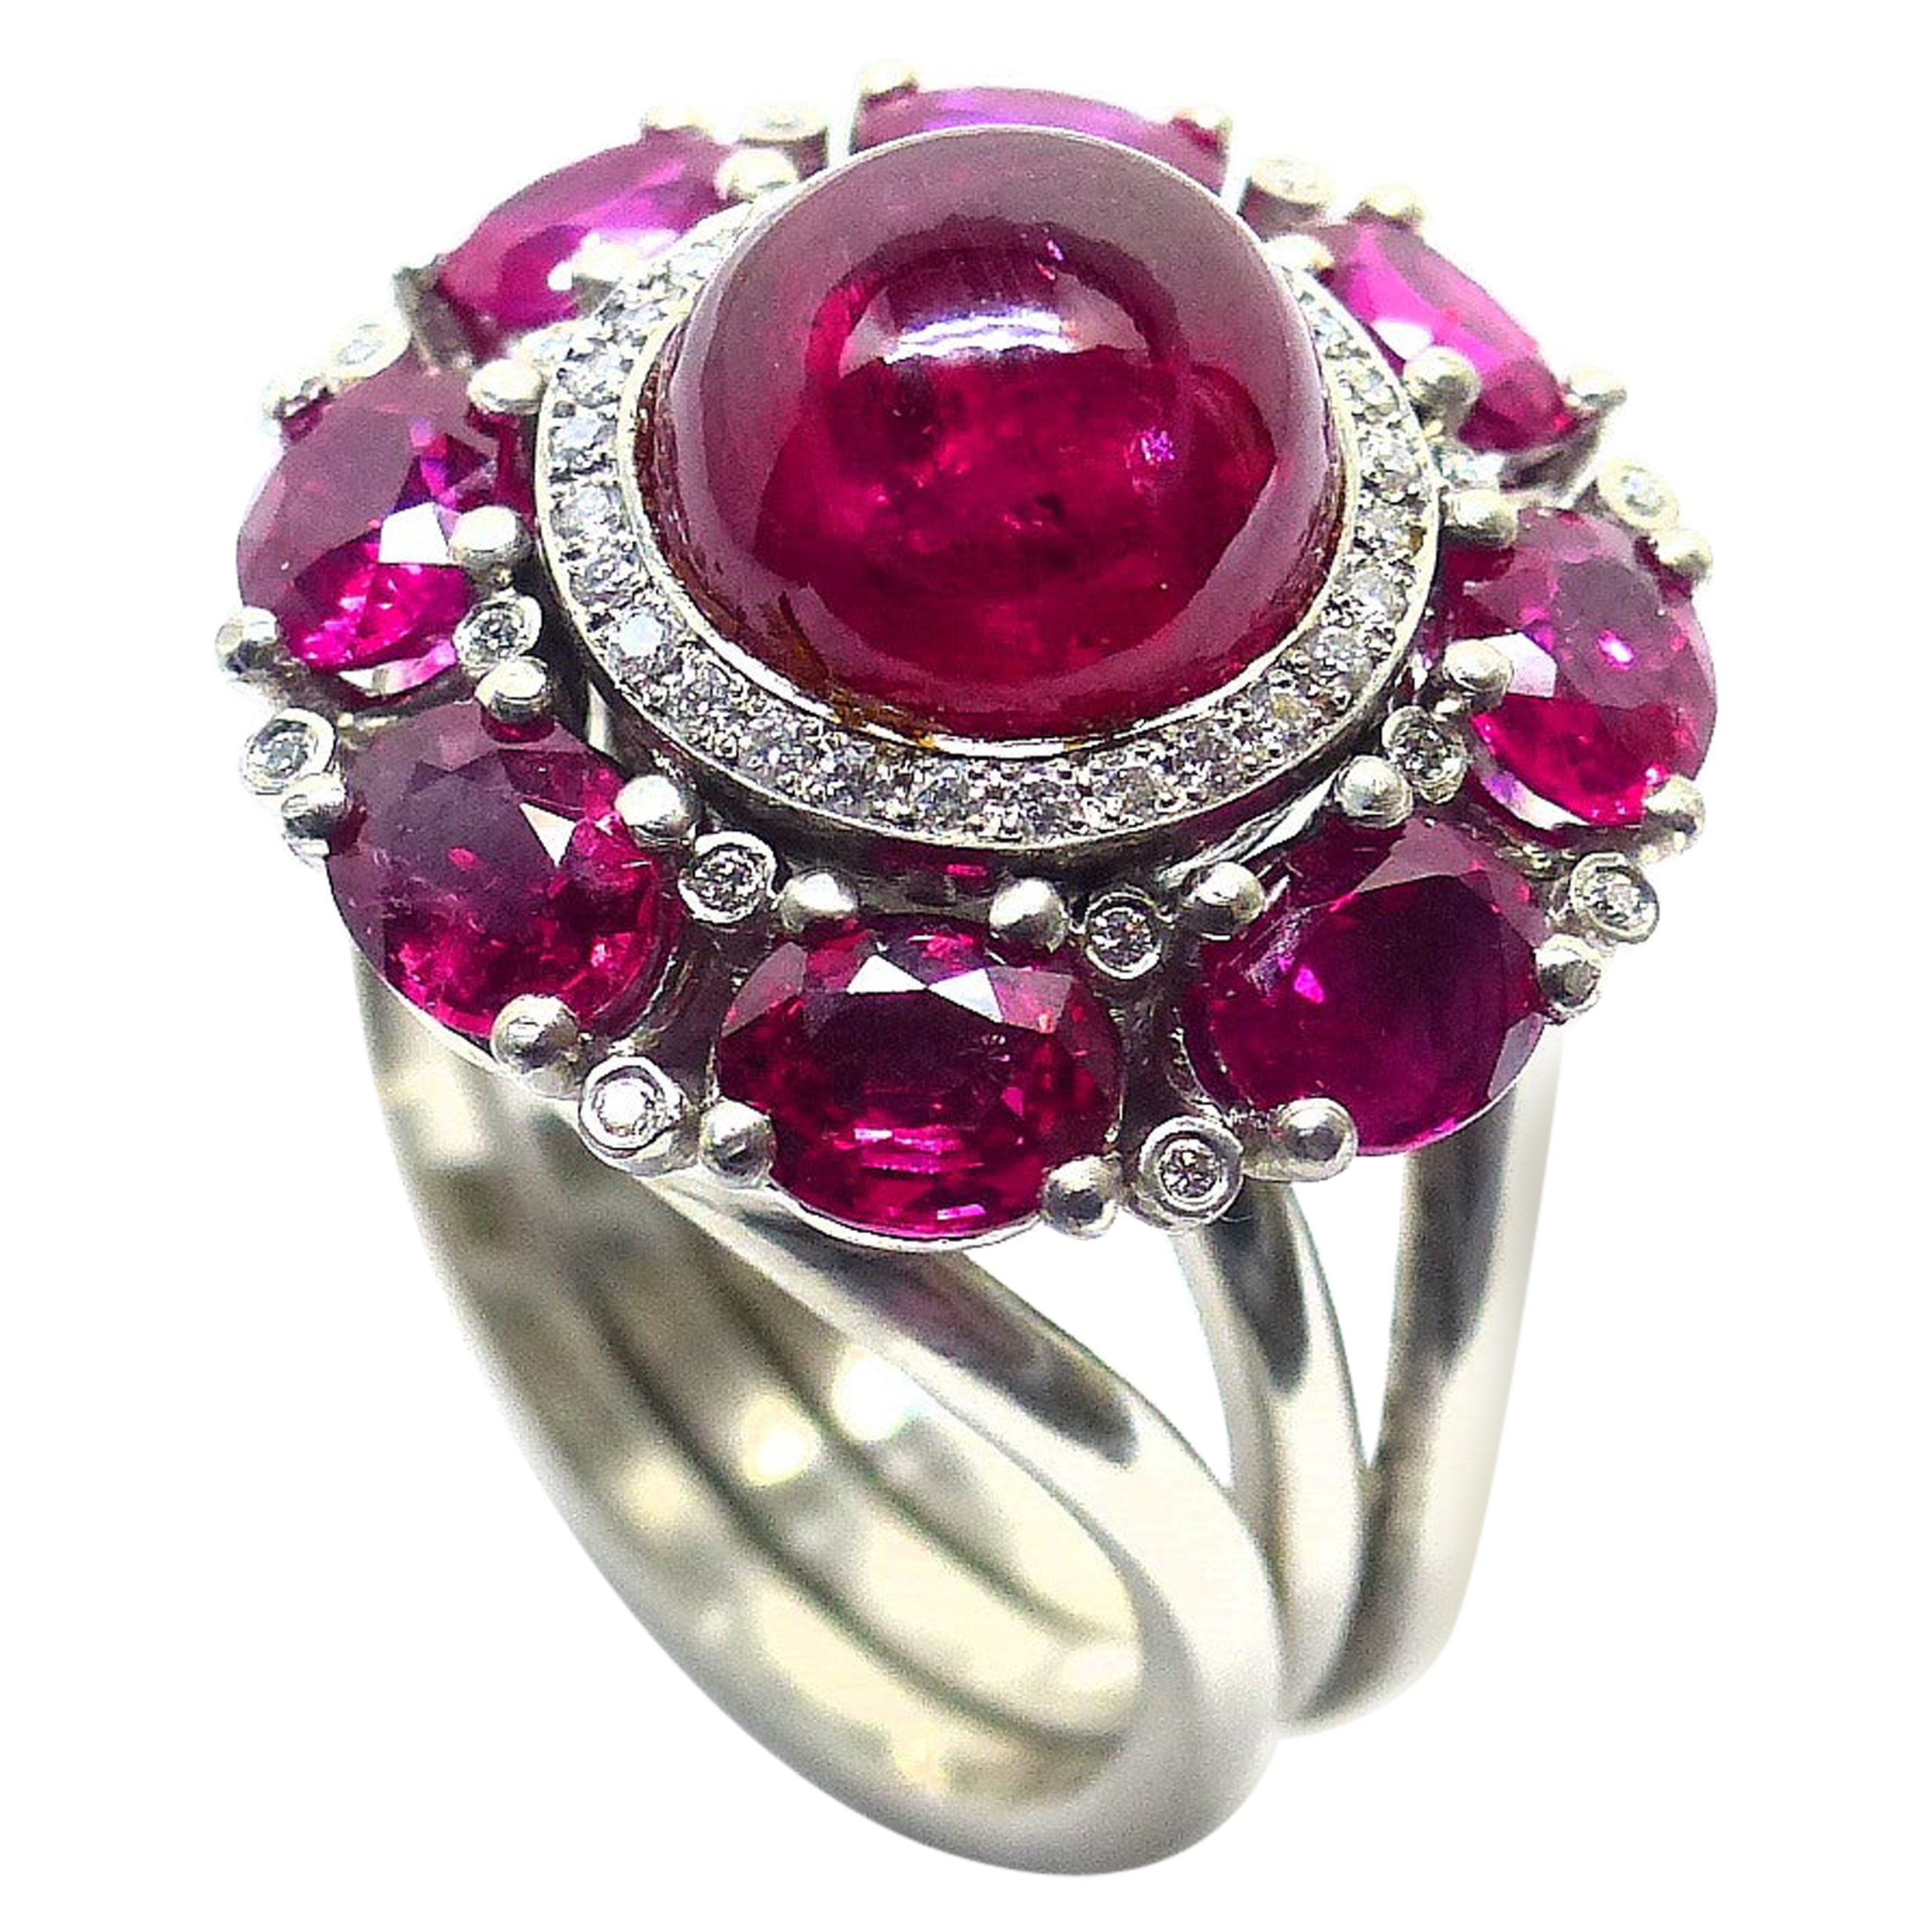 Ring in Platinum with 1 red Ruby Cab. and 8 red Rubies fac. and Diamonds